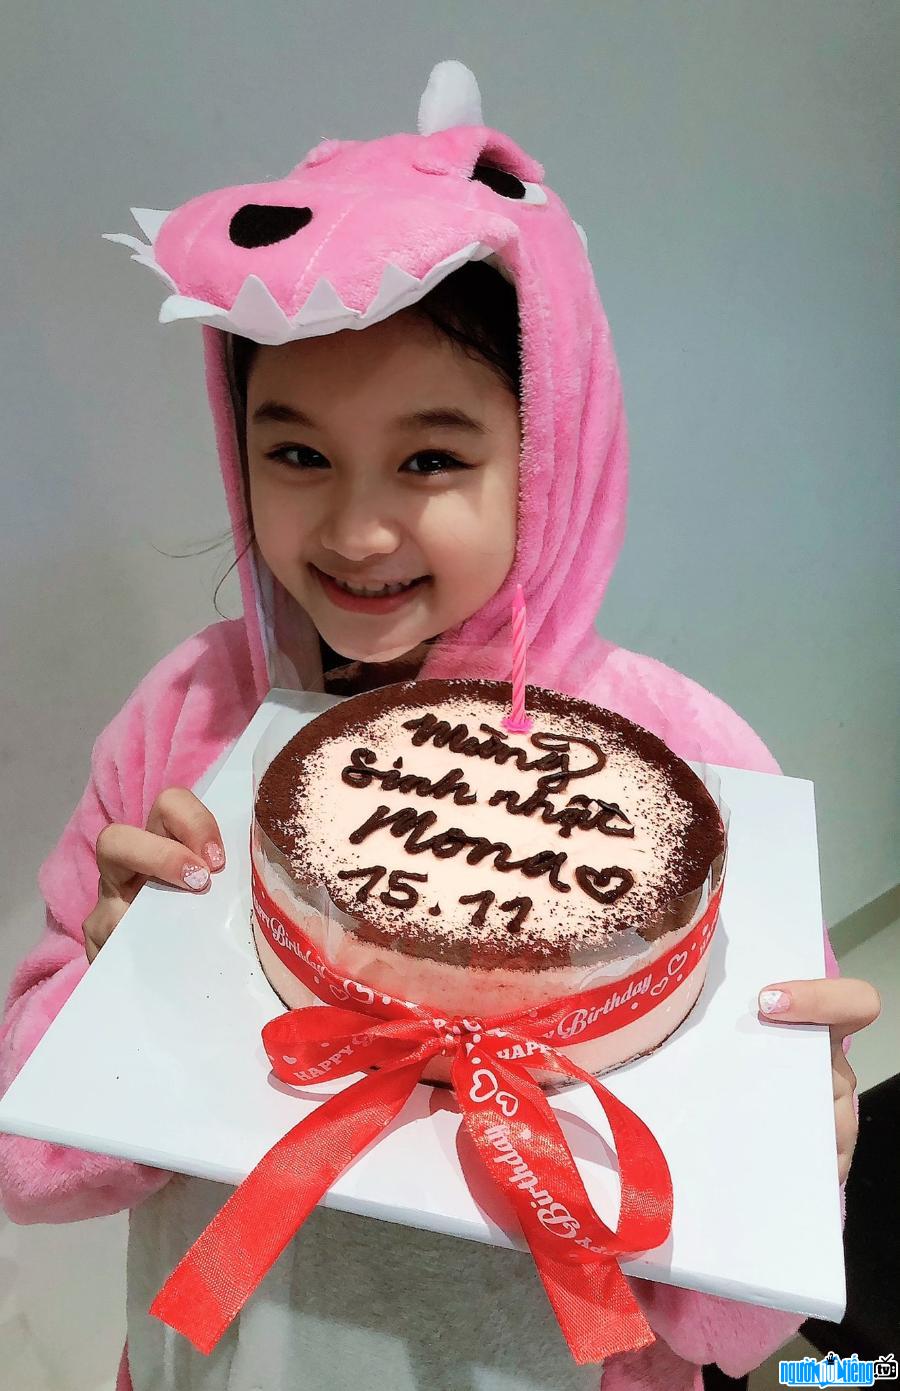  Picture of child actor Mona Bao Tien having fun and lovely on her birthday